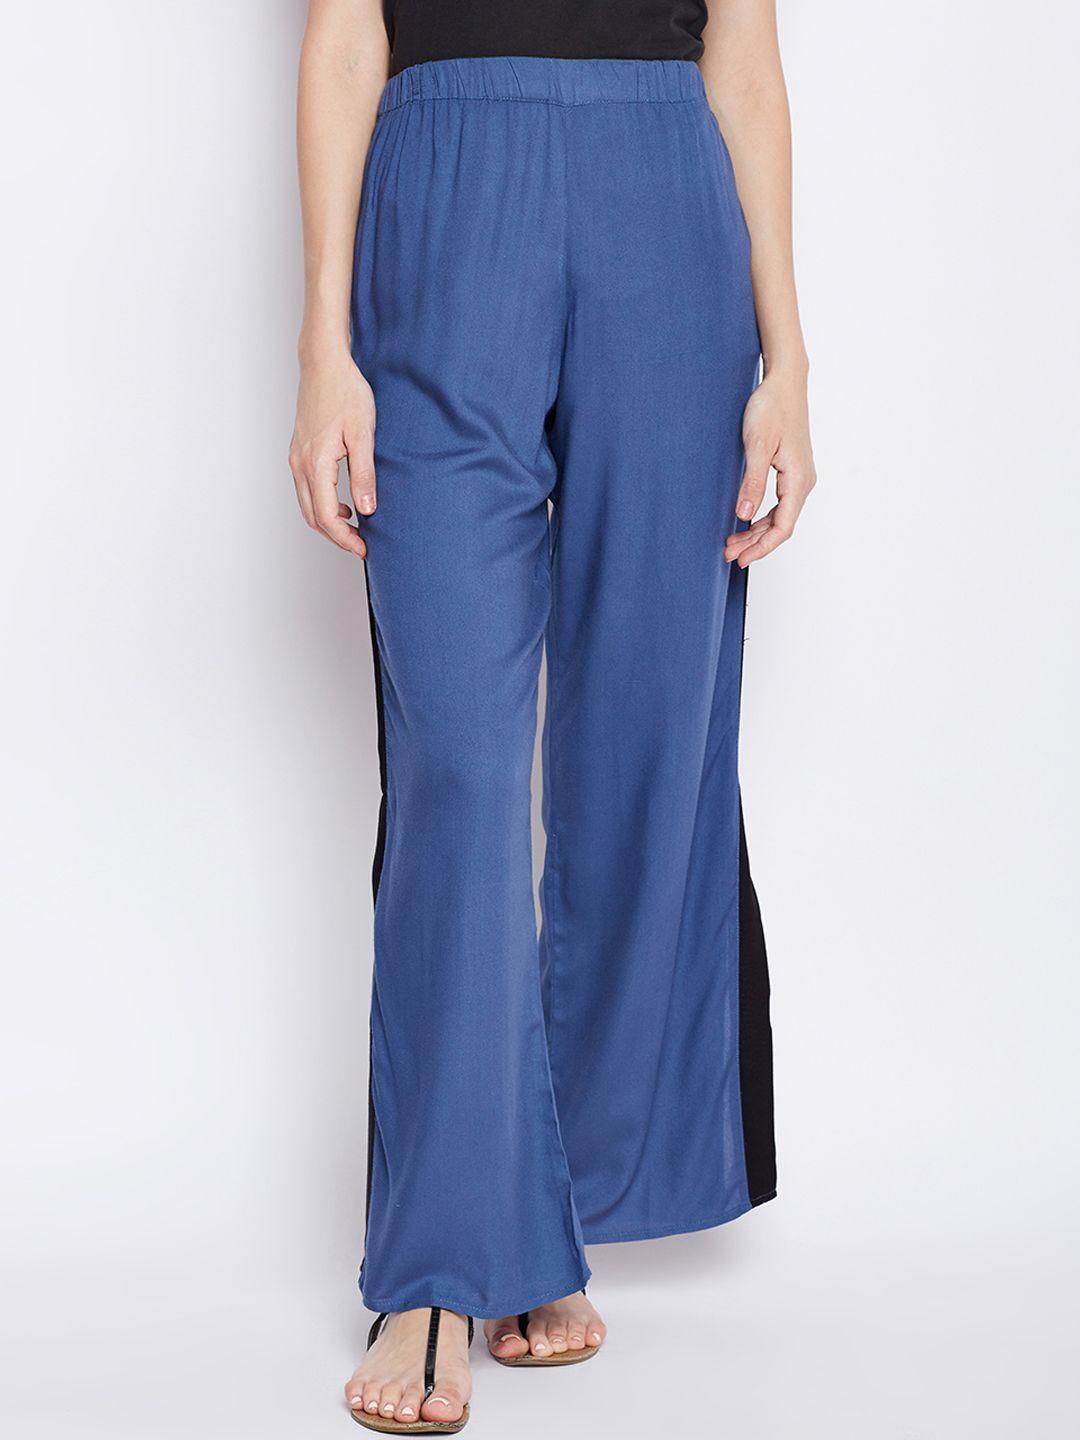 oxolloxo-women-blue-regular-fit-solid-parallel-trousers